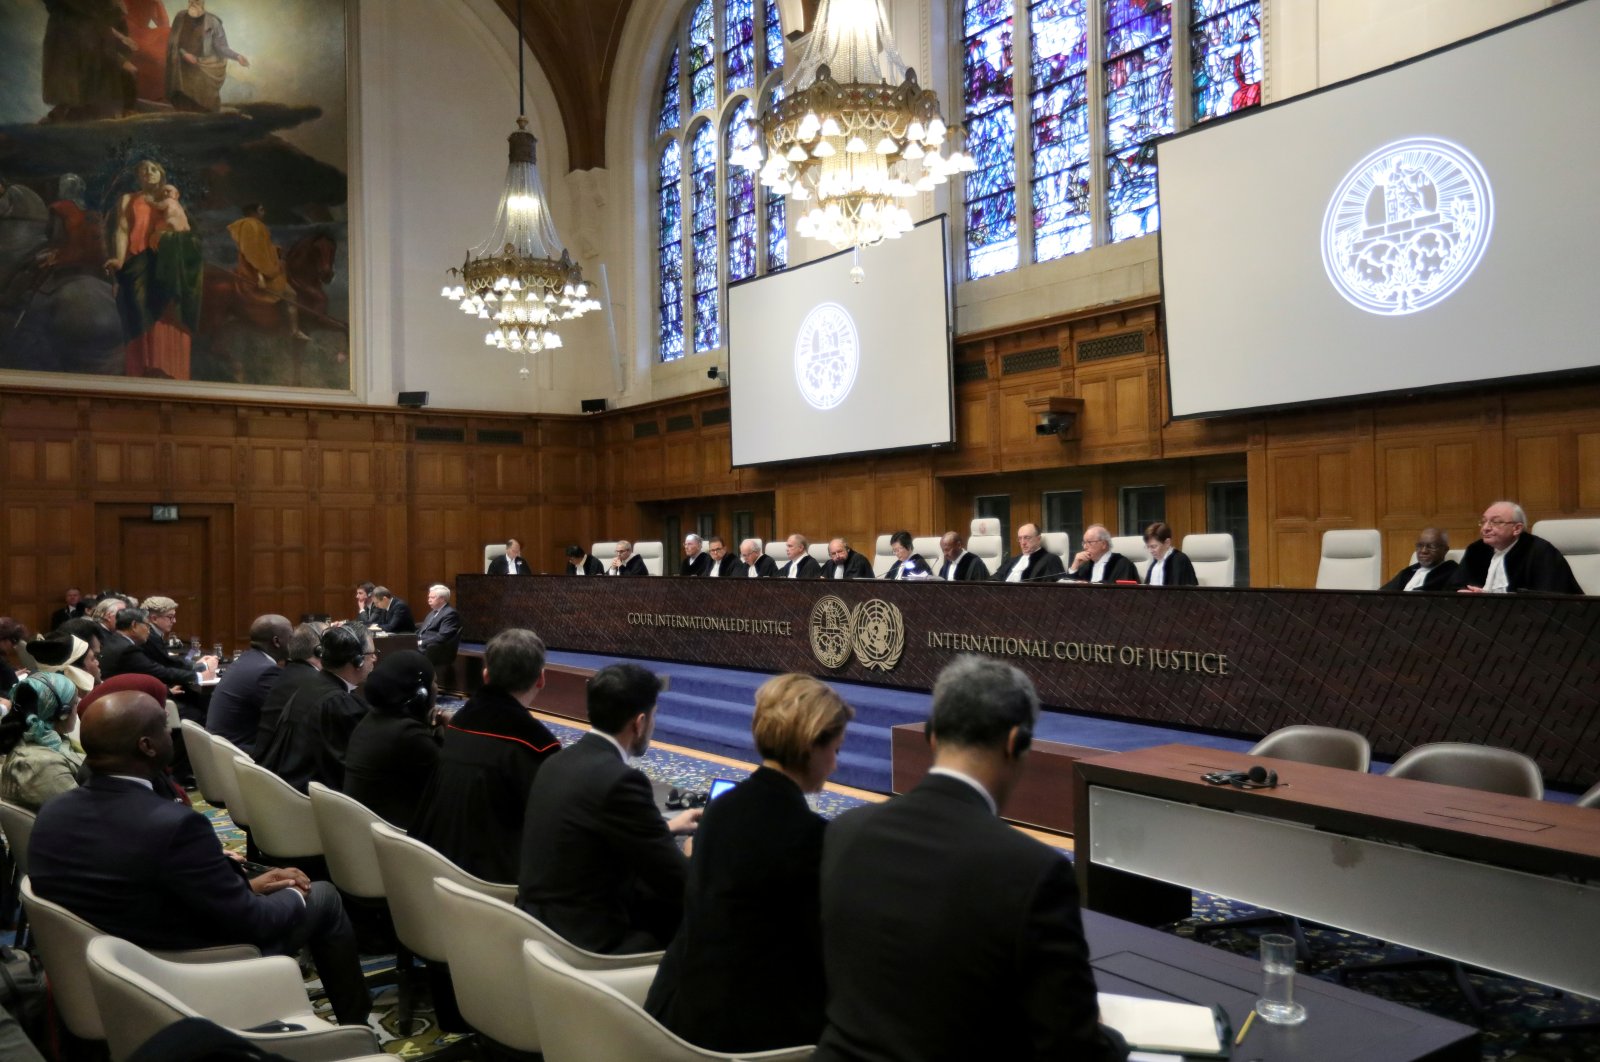 General view of the court during the ruling in a case filed by Gambia against Myanmar alleging genocide against the minority Muslim Rohingya population, at the International Court of Justice (ICJ) in The Hague, Netherlands on Jan. 23, 2020. (Reuters Photo)